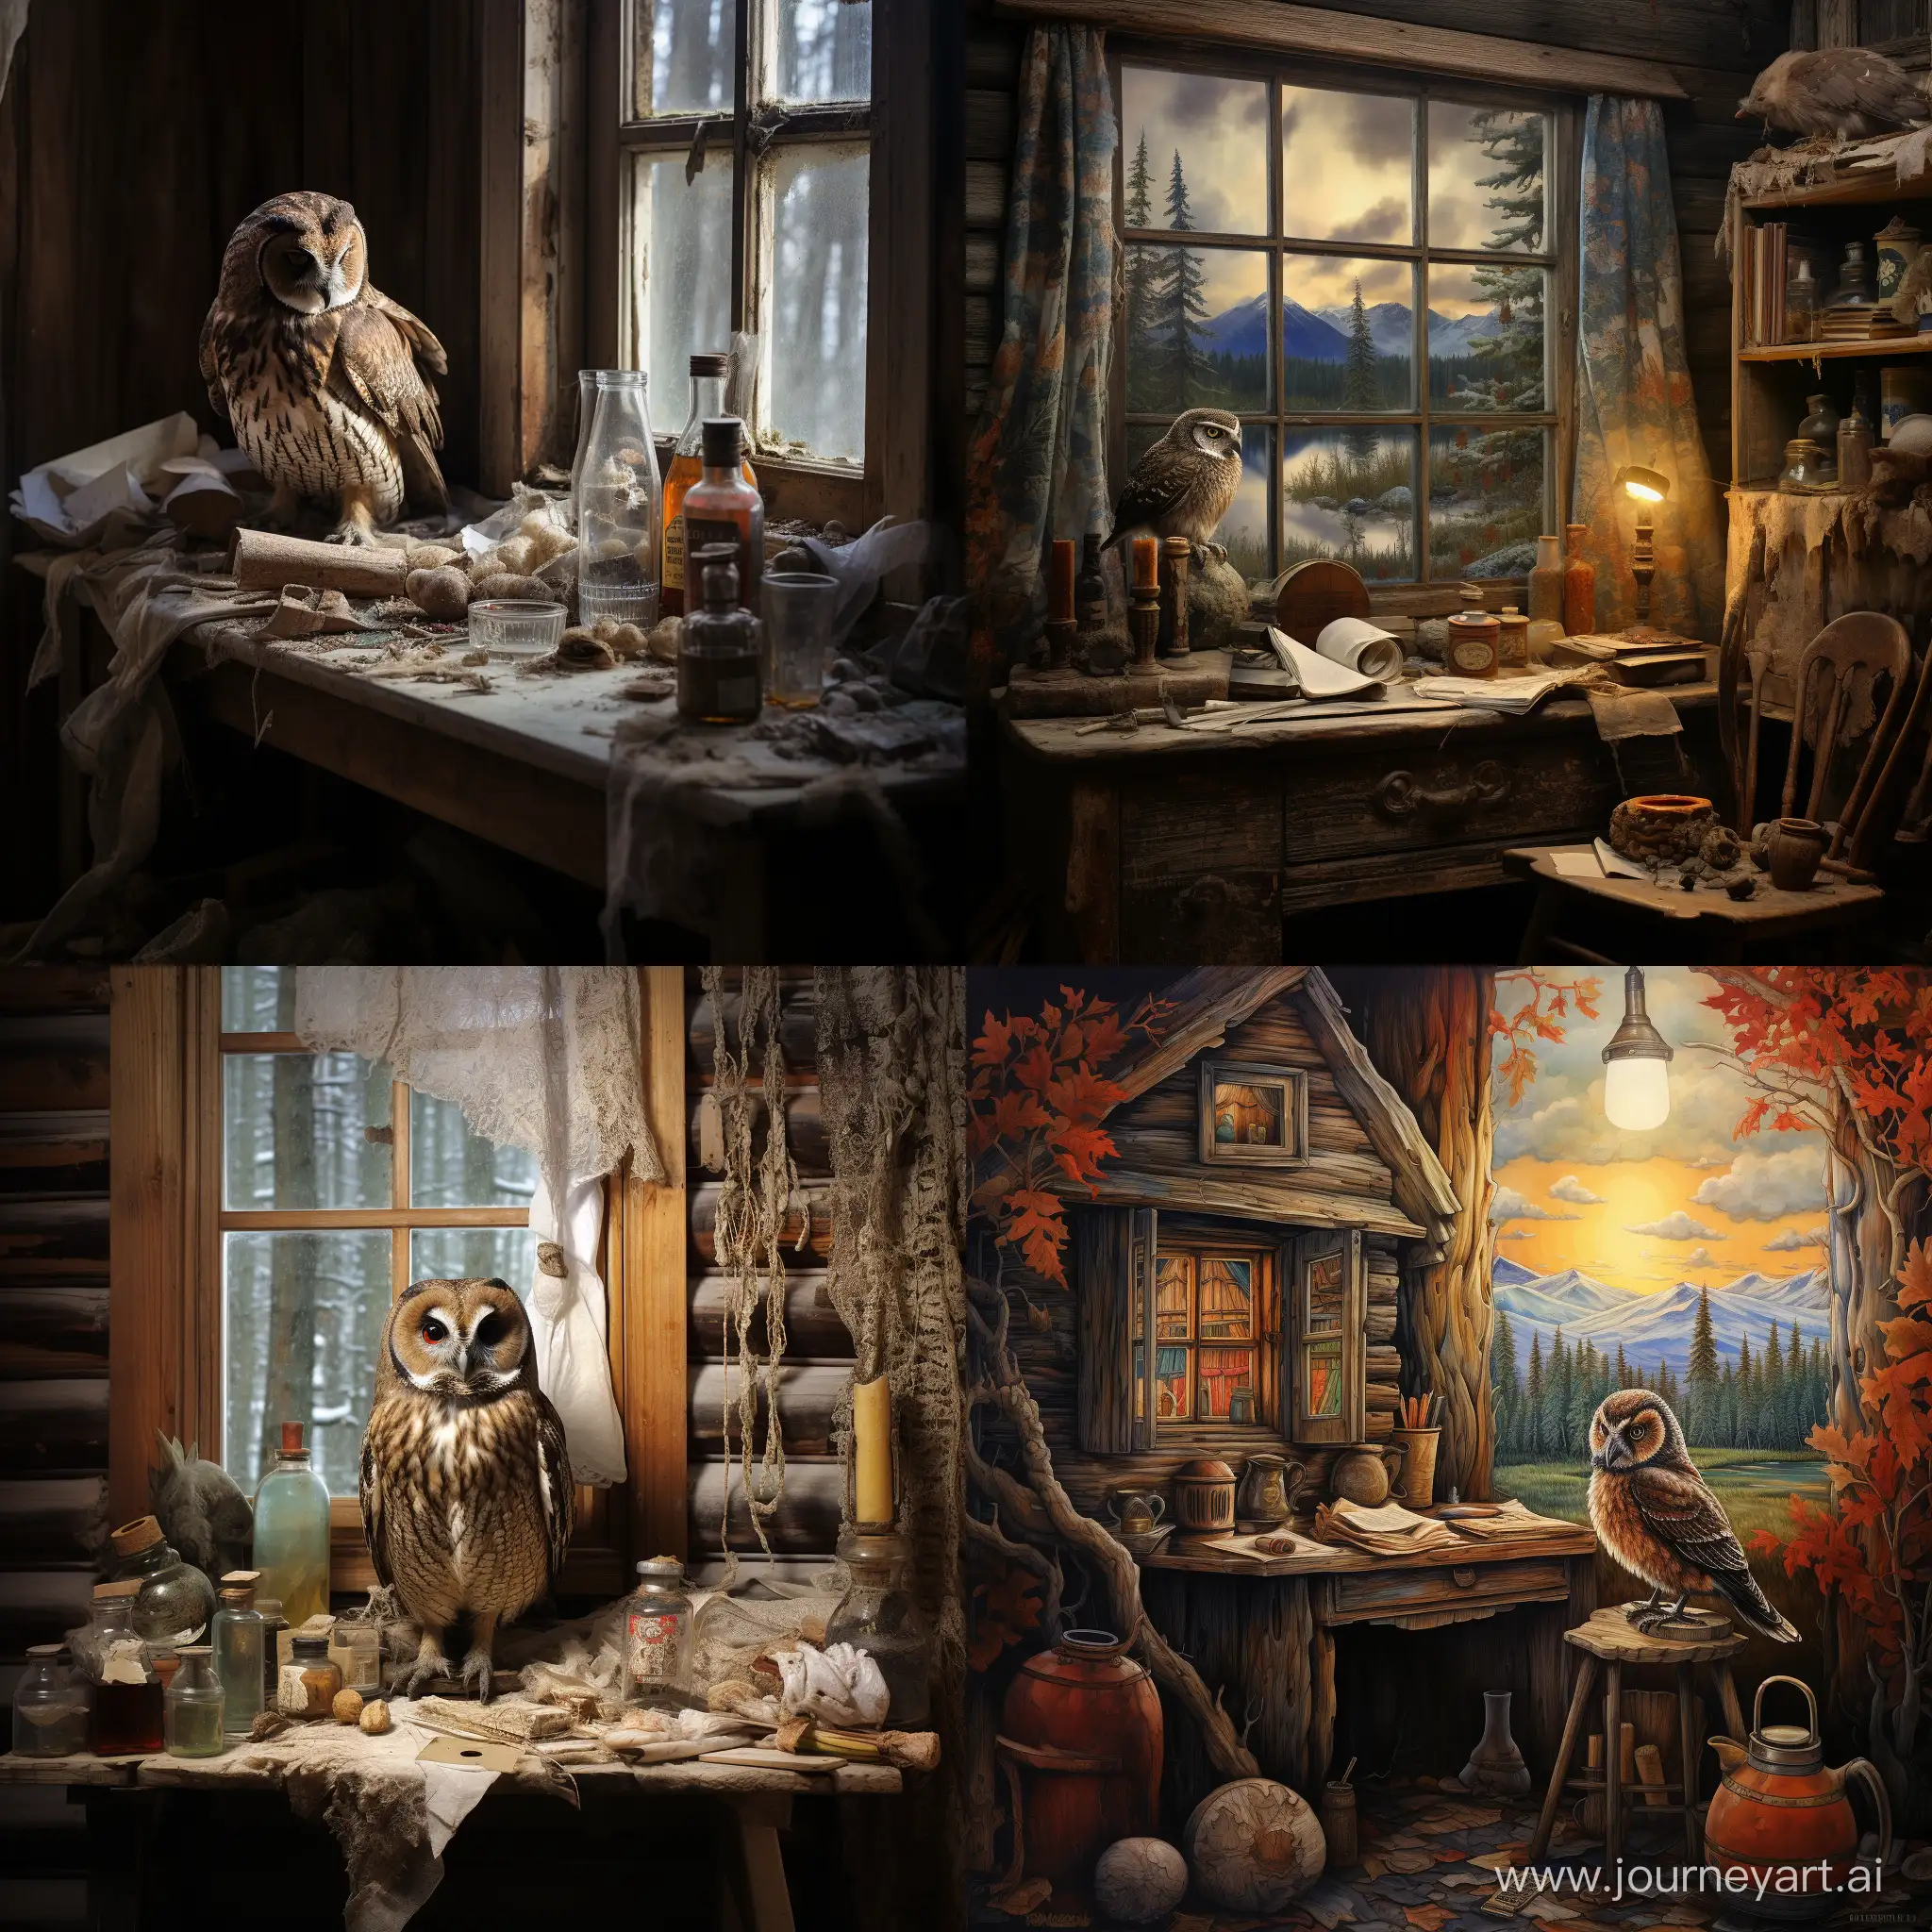 Subject: The action unfolds in a secluded Russian log cabin nestled within the taiga, adding an air of mystery and intrigue to the scene. The cabin serves as the primary setting, contributing to the clandestine atmosphere.  Background: Within the cabin, an owl perches on the windowsill, holding an envelope in its beak. The owl's presence adds an element of magic and mystique, suggesting a message being delivered. The choice of an owl as a messenger implies wisdom and secrecy, enhancing the overall narrative.  Items: A glass bottle of vodka labeled 'vodochka' on the table becomes a focal point, providing cultural context and hinting at a celebratory or significant moment. Additionally, a Japanese katana sword hanging on the wall introduces an unexpected element, sparking curiosity about its origin and connection to the story.  Style/Coloring: The image is rendered in a realistic style with a 4k resolution, ensuring clarity and detail. The winter landscape visible through the window, combined with the blizzard, emphasizes the harsh conditions outside, contrasting with the warmth and intrigue inside the cabin.  Action: The main action centers around the owl delivering a message, creating a dynamic focal point and suggesting a pivotal moment in the narrative. The inclusion of the vodka bottle and the katana sword adds layers to the story, leaving room for interpretation and engaging the viewer's imagination.